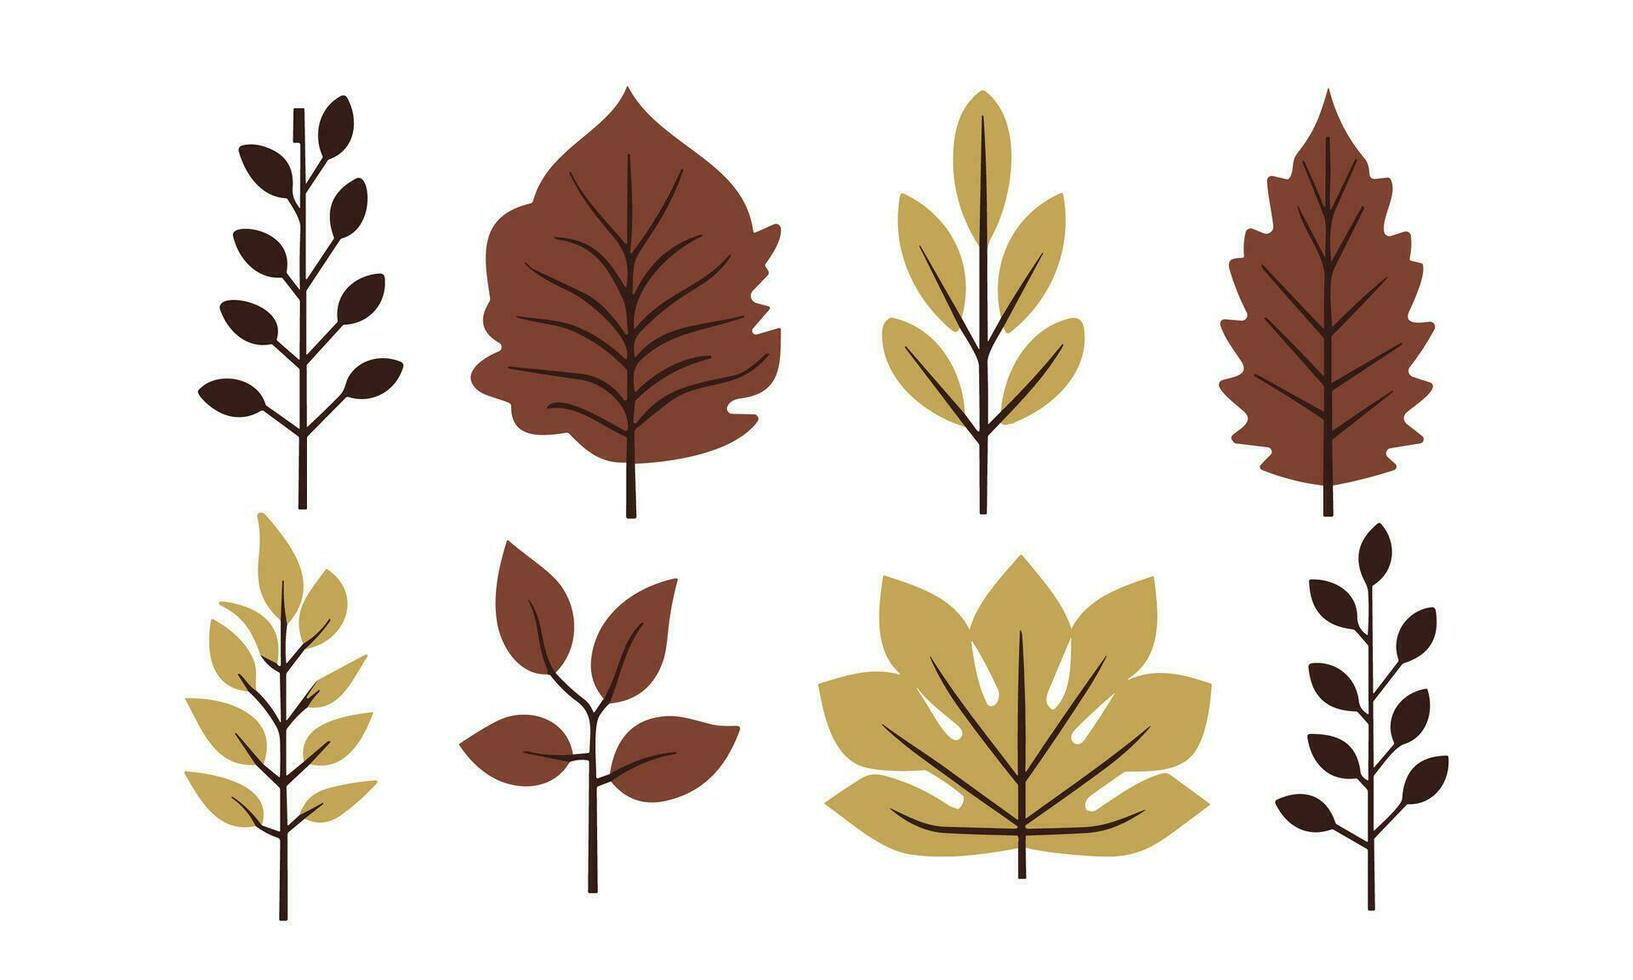 Hand drawn autumn leaves illustrations vector